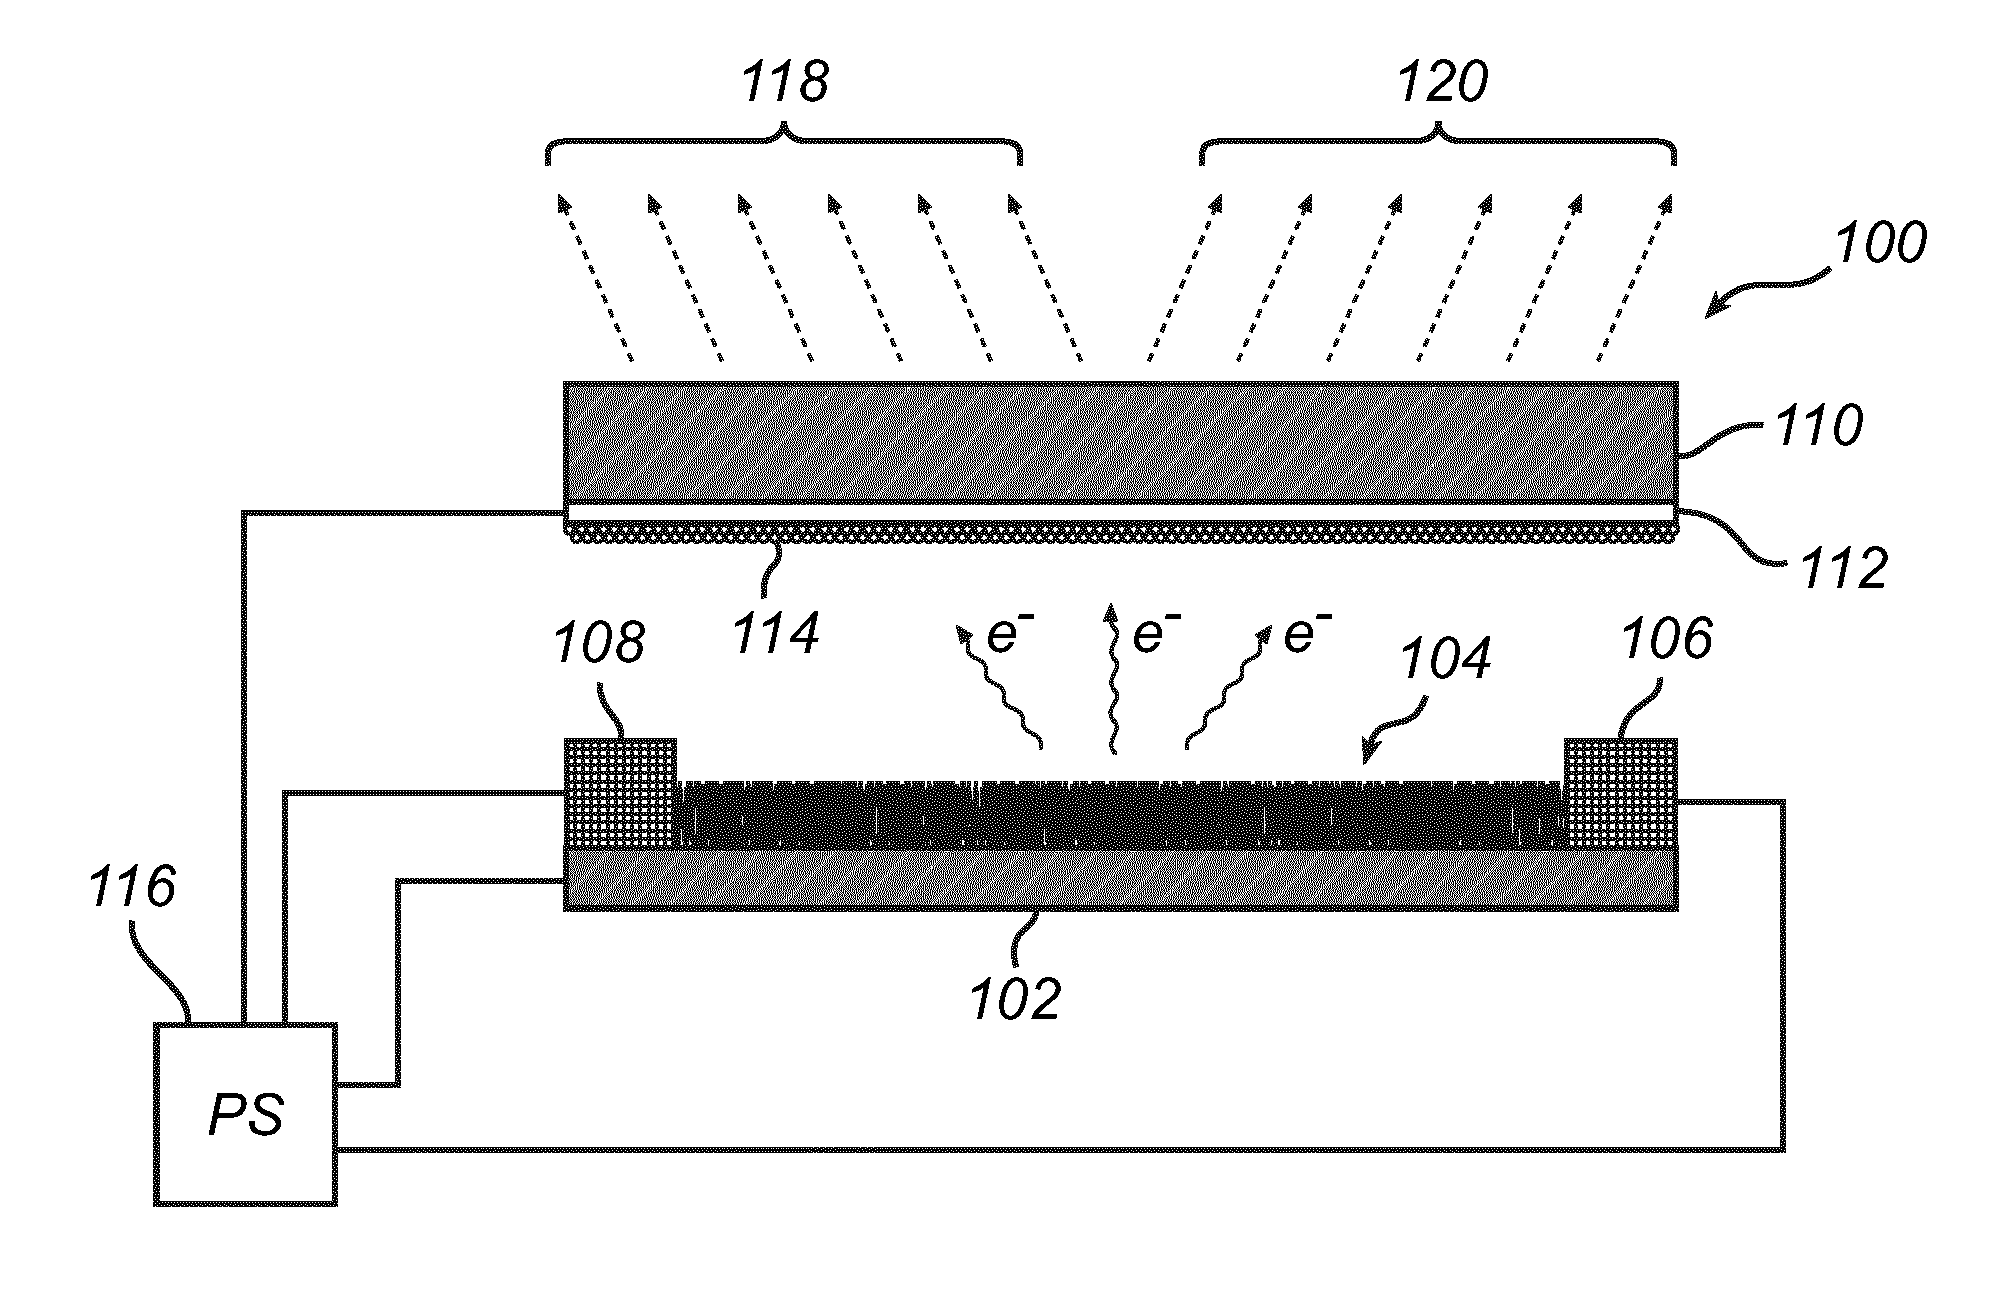 Electrical power control of a field emission lighting system